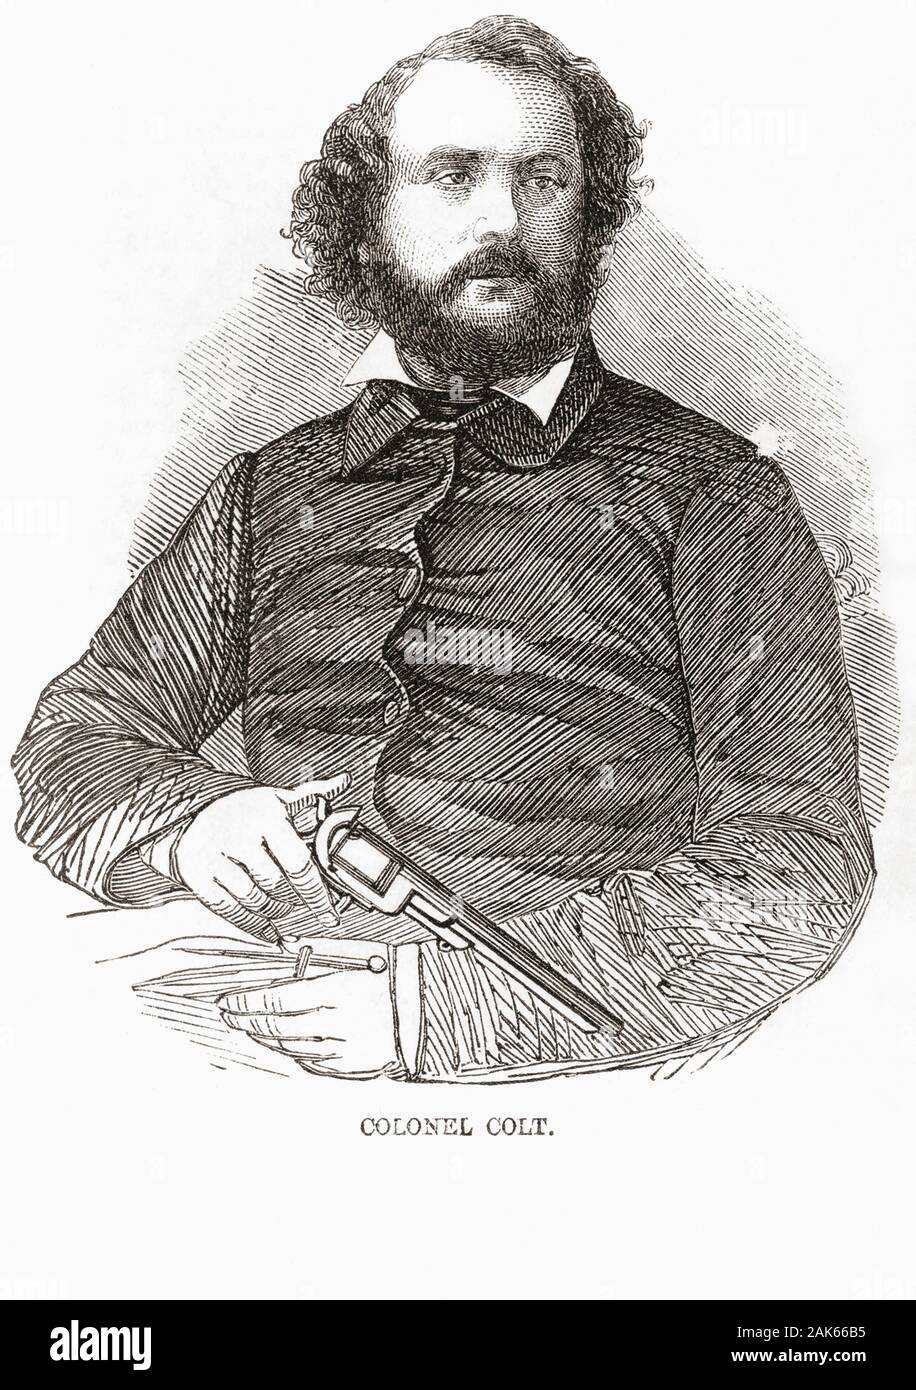 Samuel Colt, 1814 - 1862.  American inventor and businessman whose name is synonymous with the Colt revolver. Stock Photo